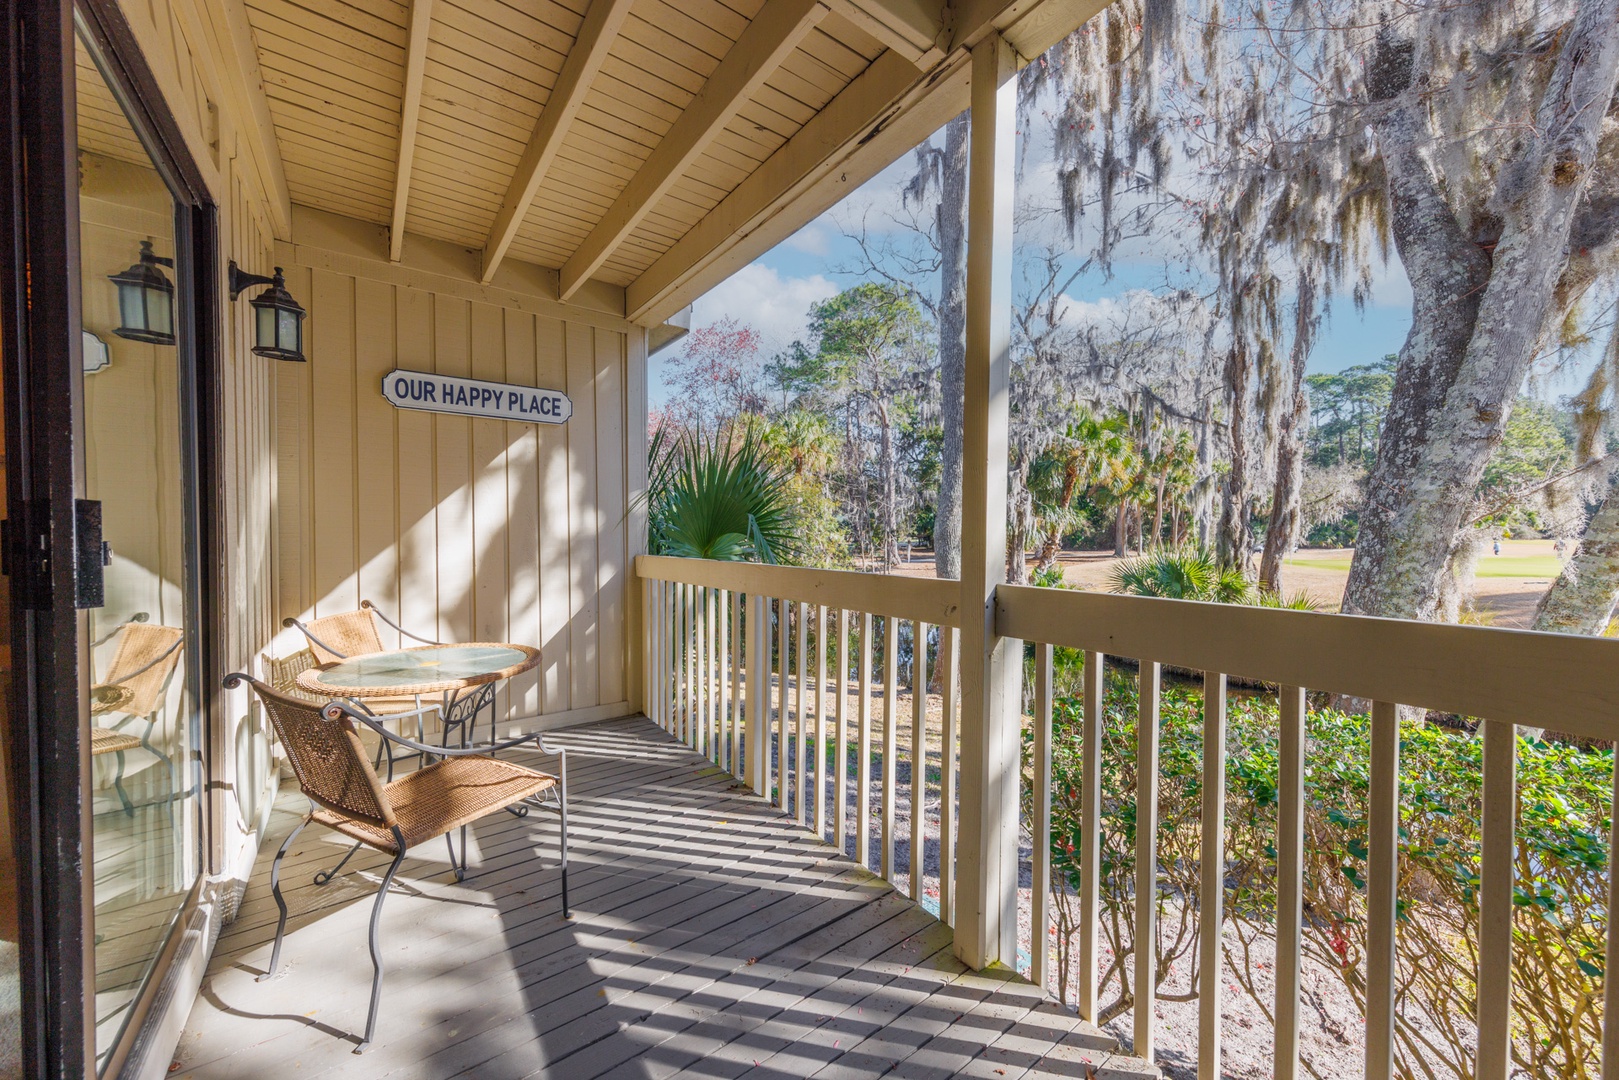 Retreat to the deck and enjoy scenic views of the property